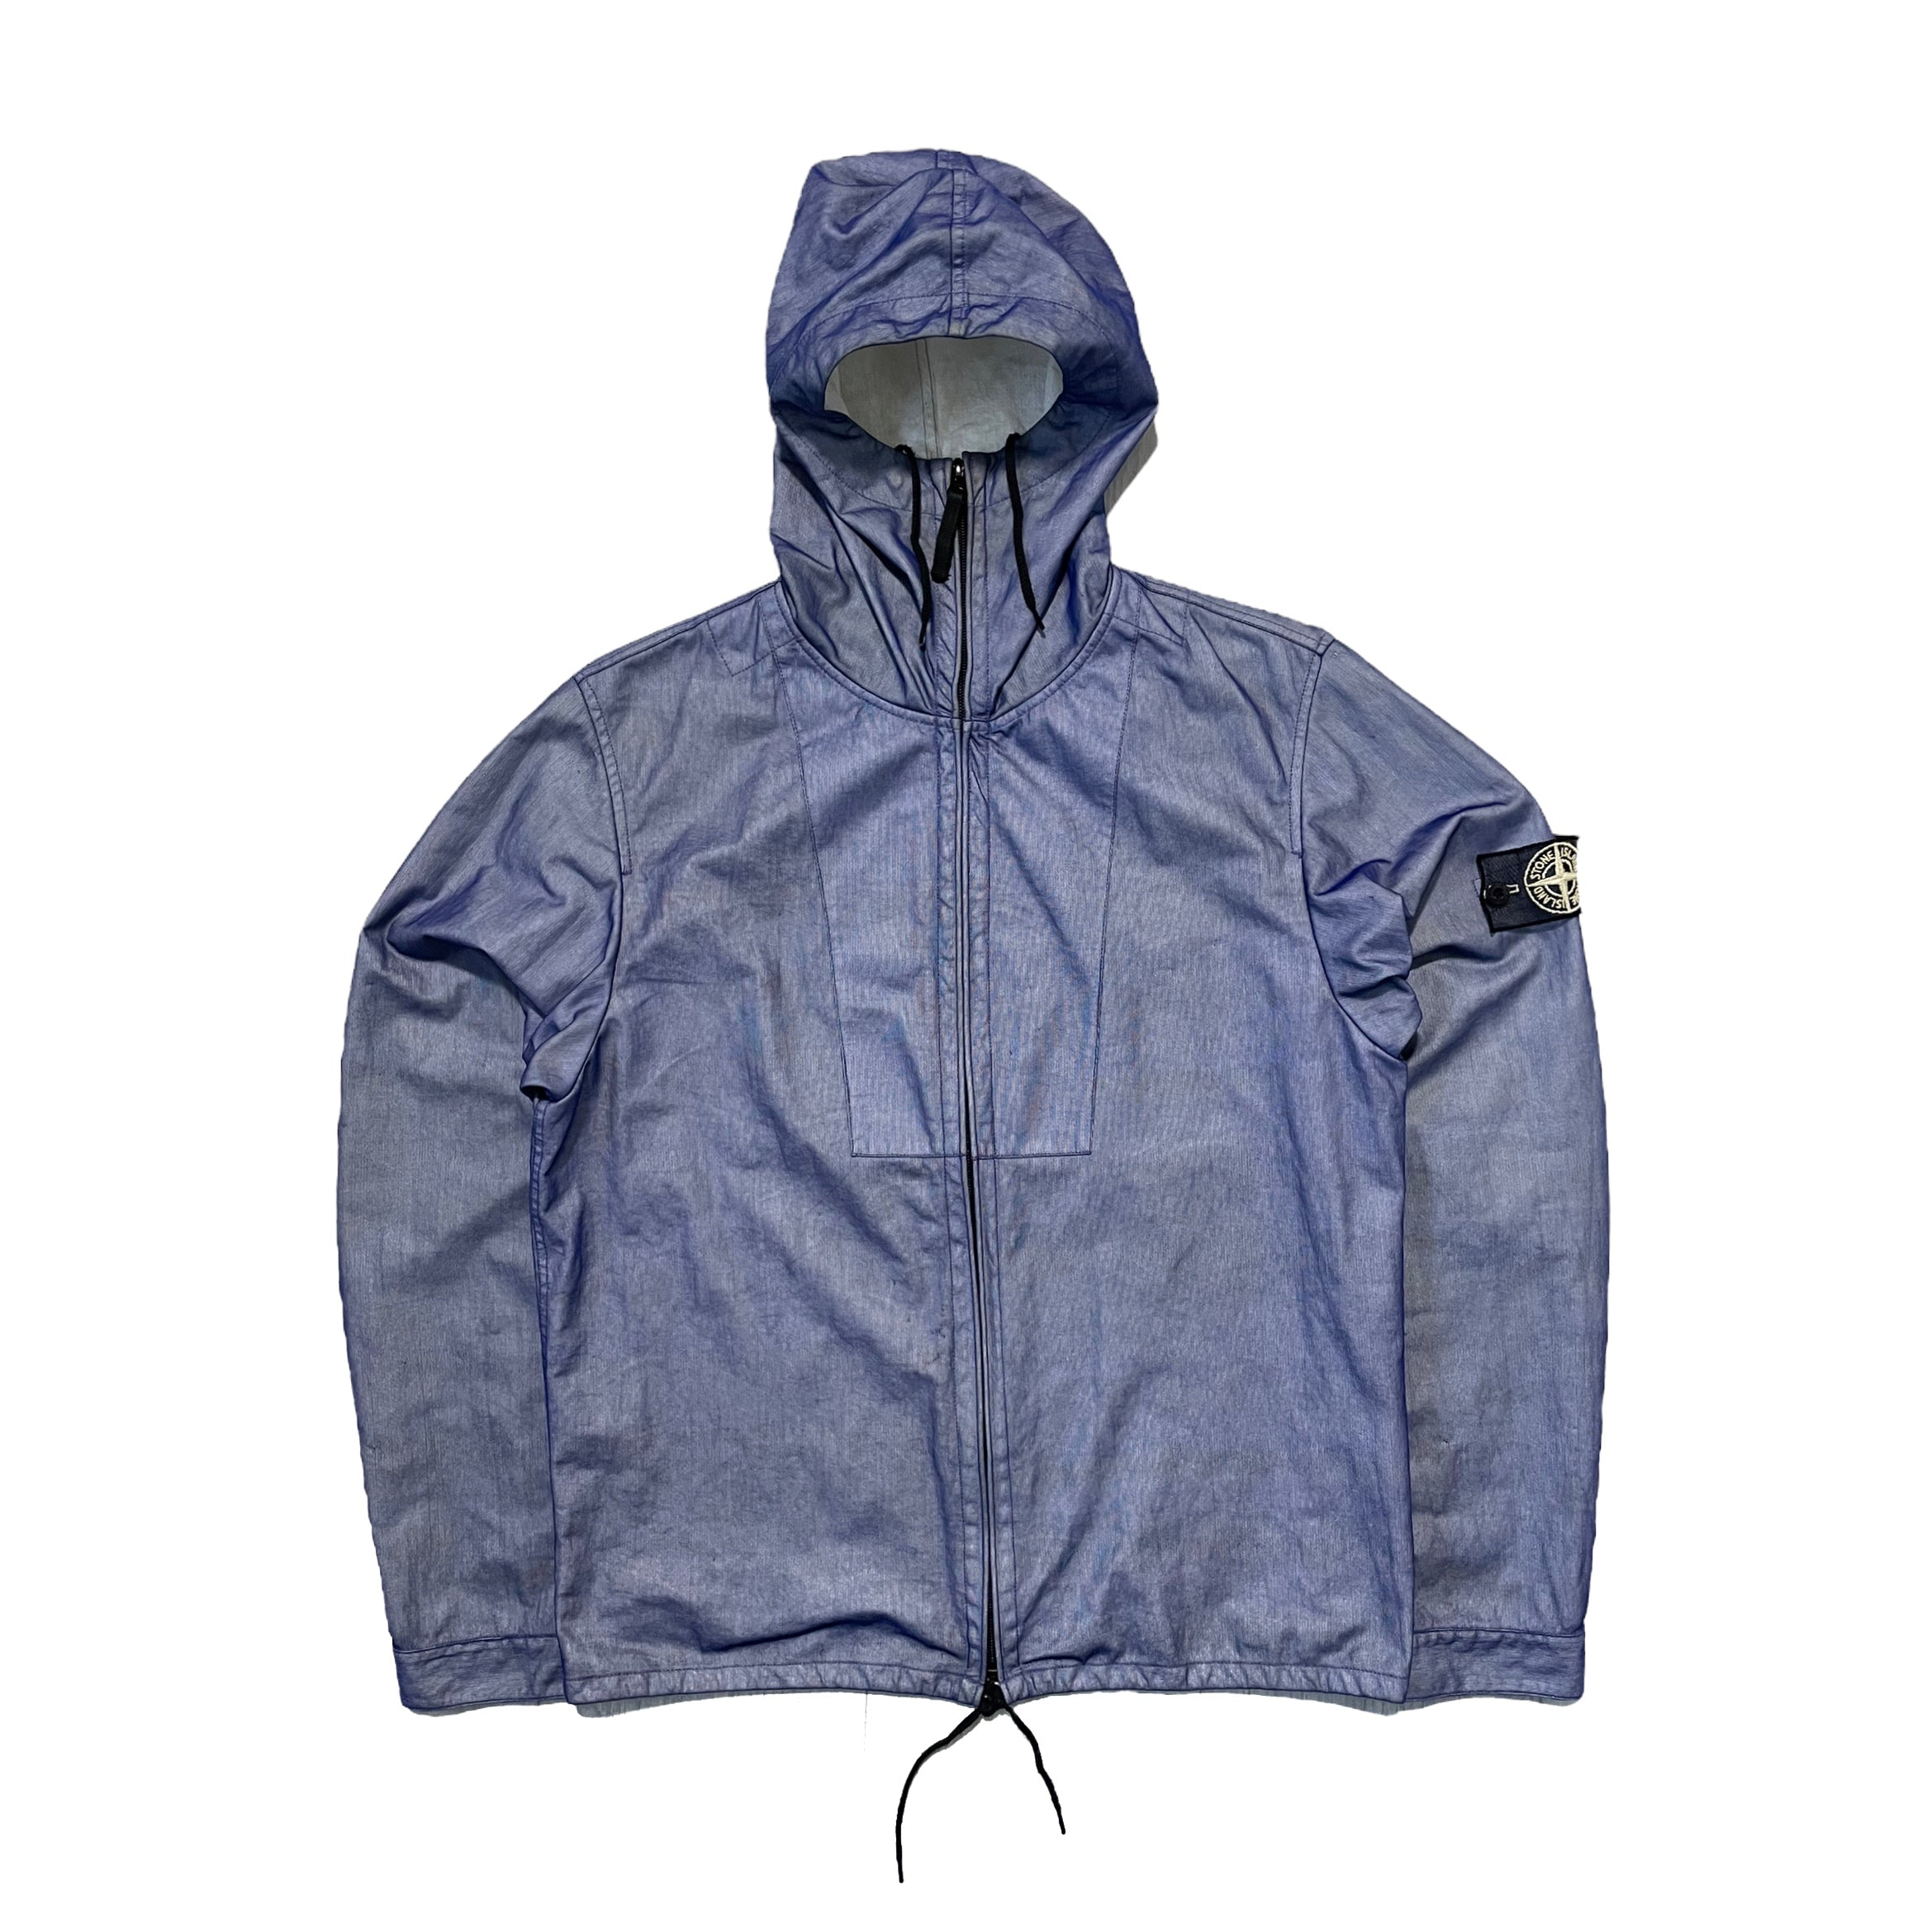 Stone Island Snowflake “In an avalanche no single snowflake feels responsible” Tyvek Jacket with Mesh Special Process Badge